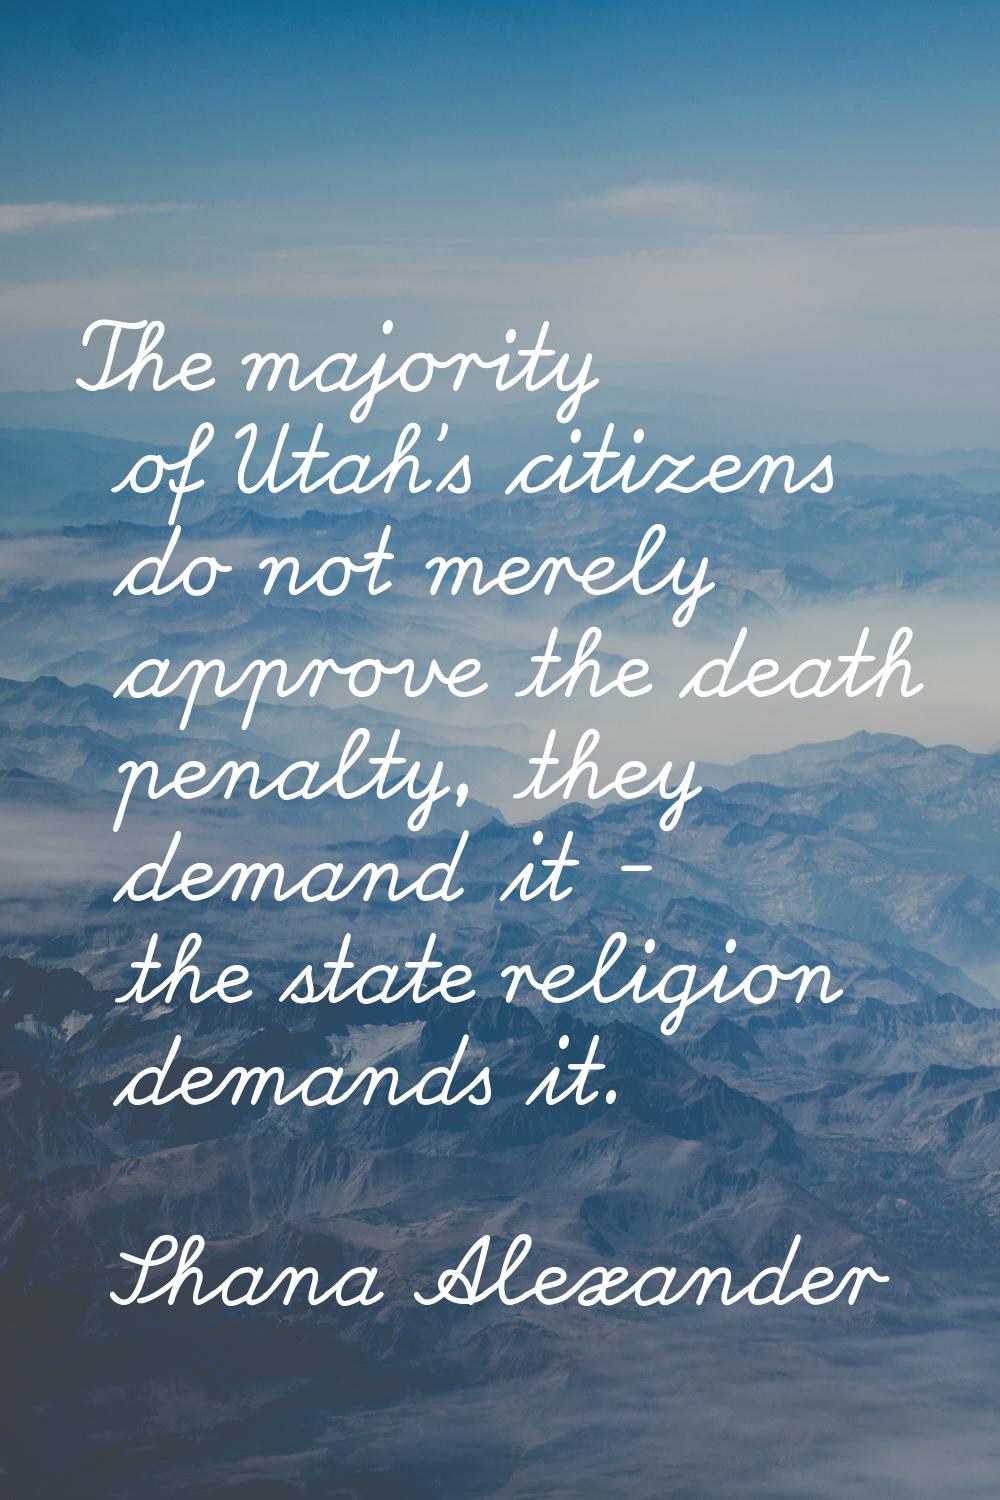 The majority of Utah's citizens do not merely approve the death penalty, they demand it - the state